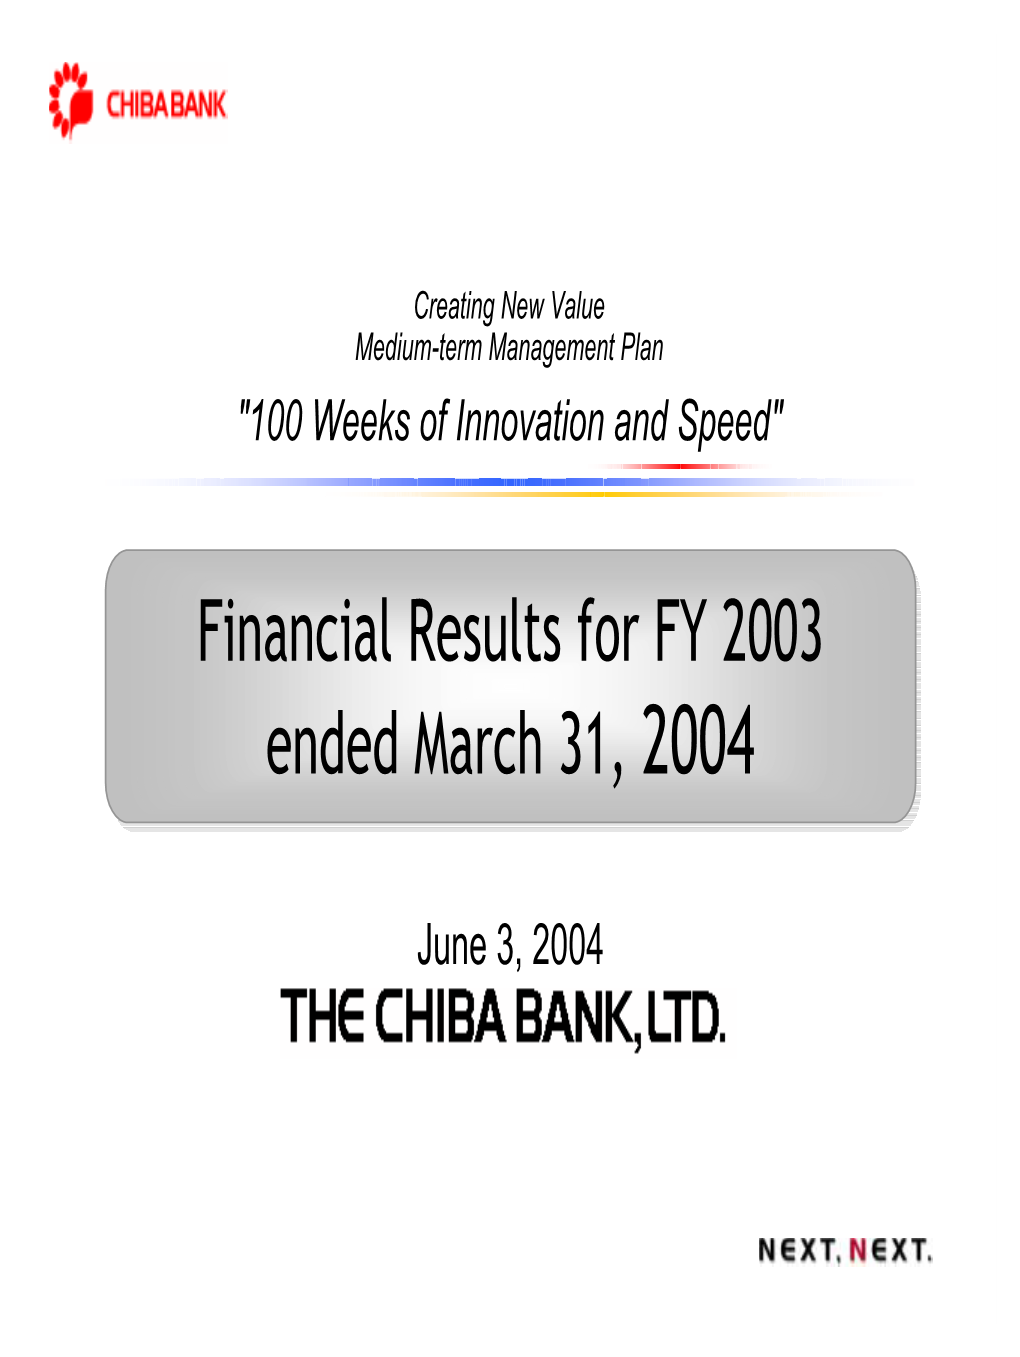 Financial Results for FY 2003 Ended March 31, 2004 Financial Results